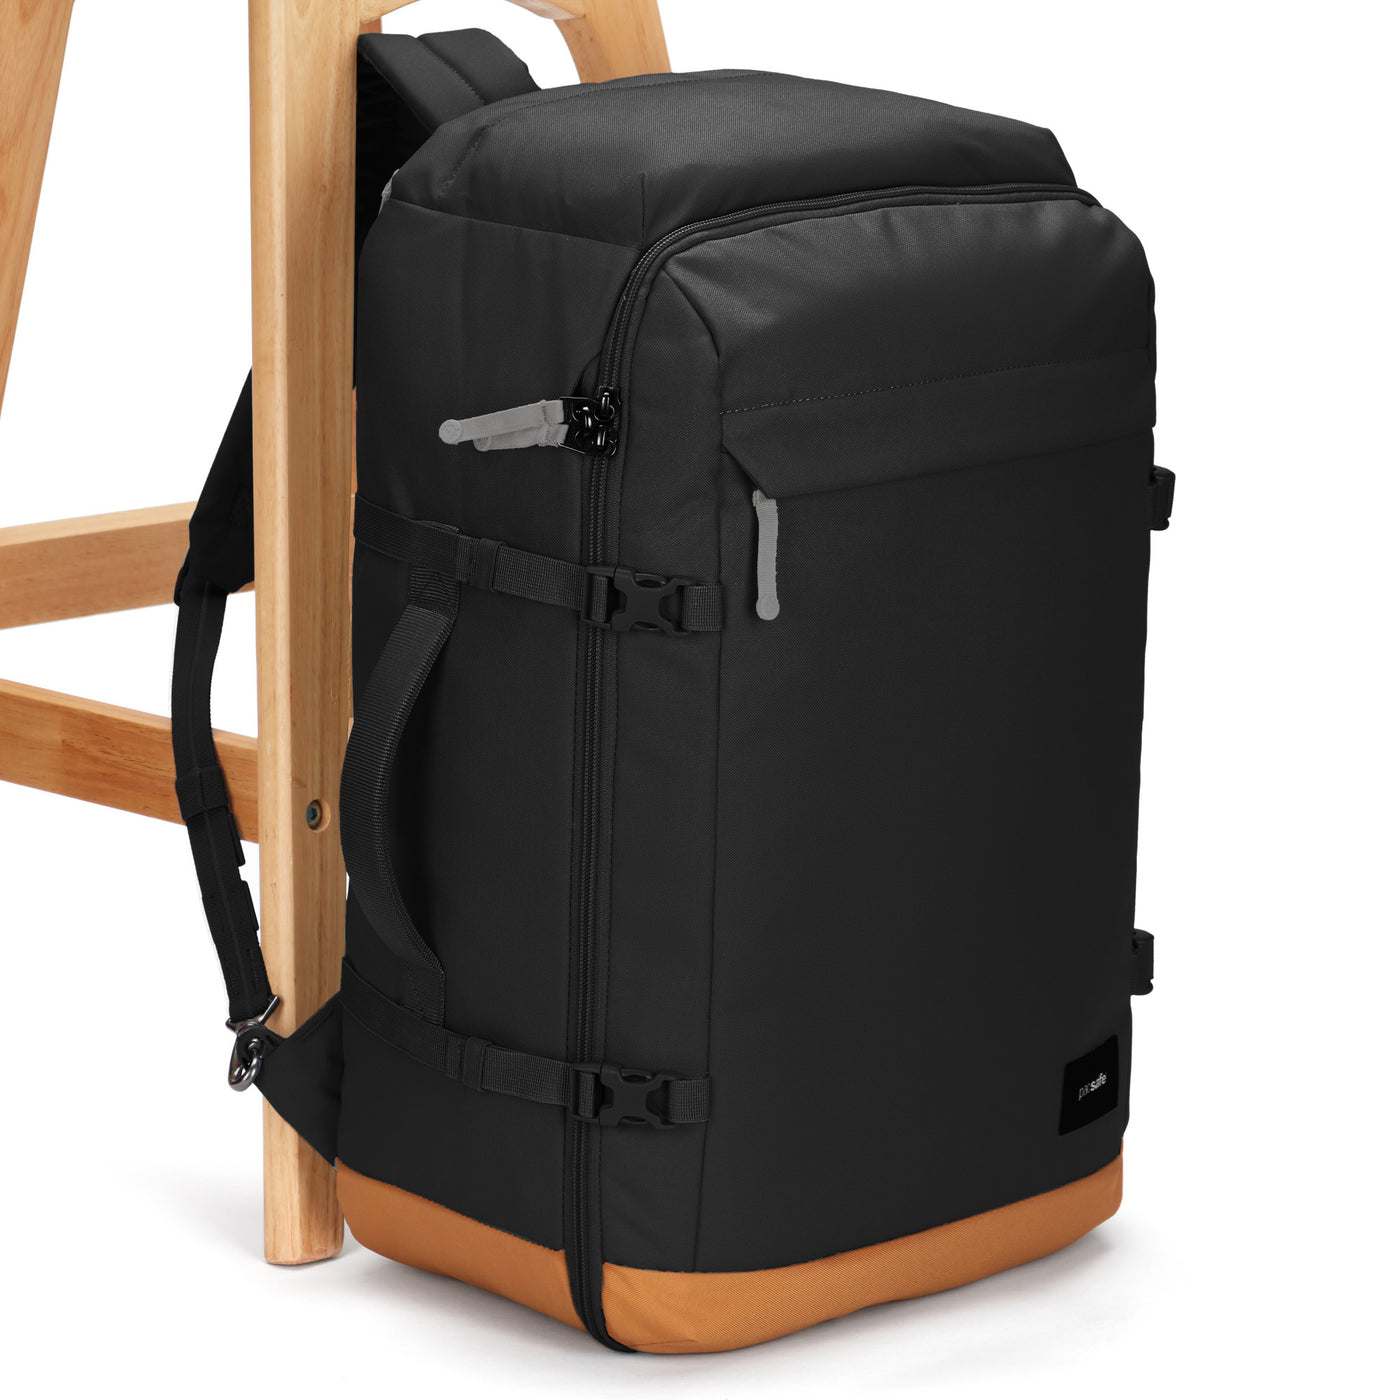 PacsafeGO 44L Carry-On Backpack